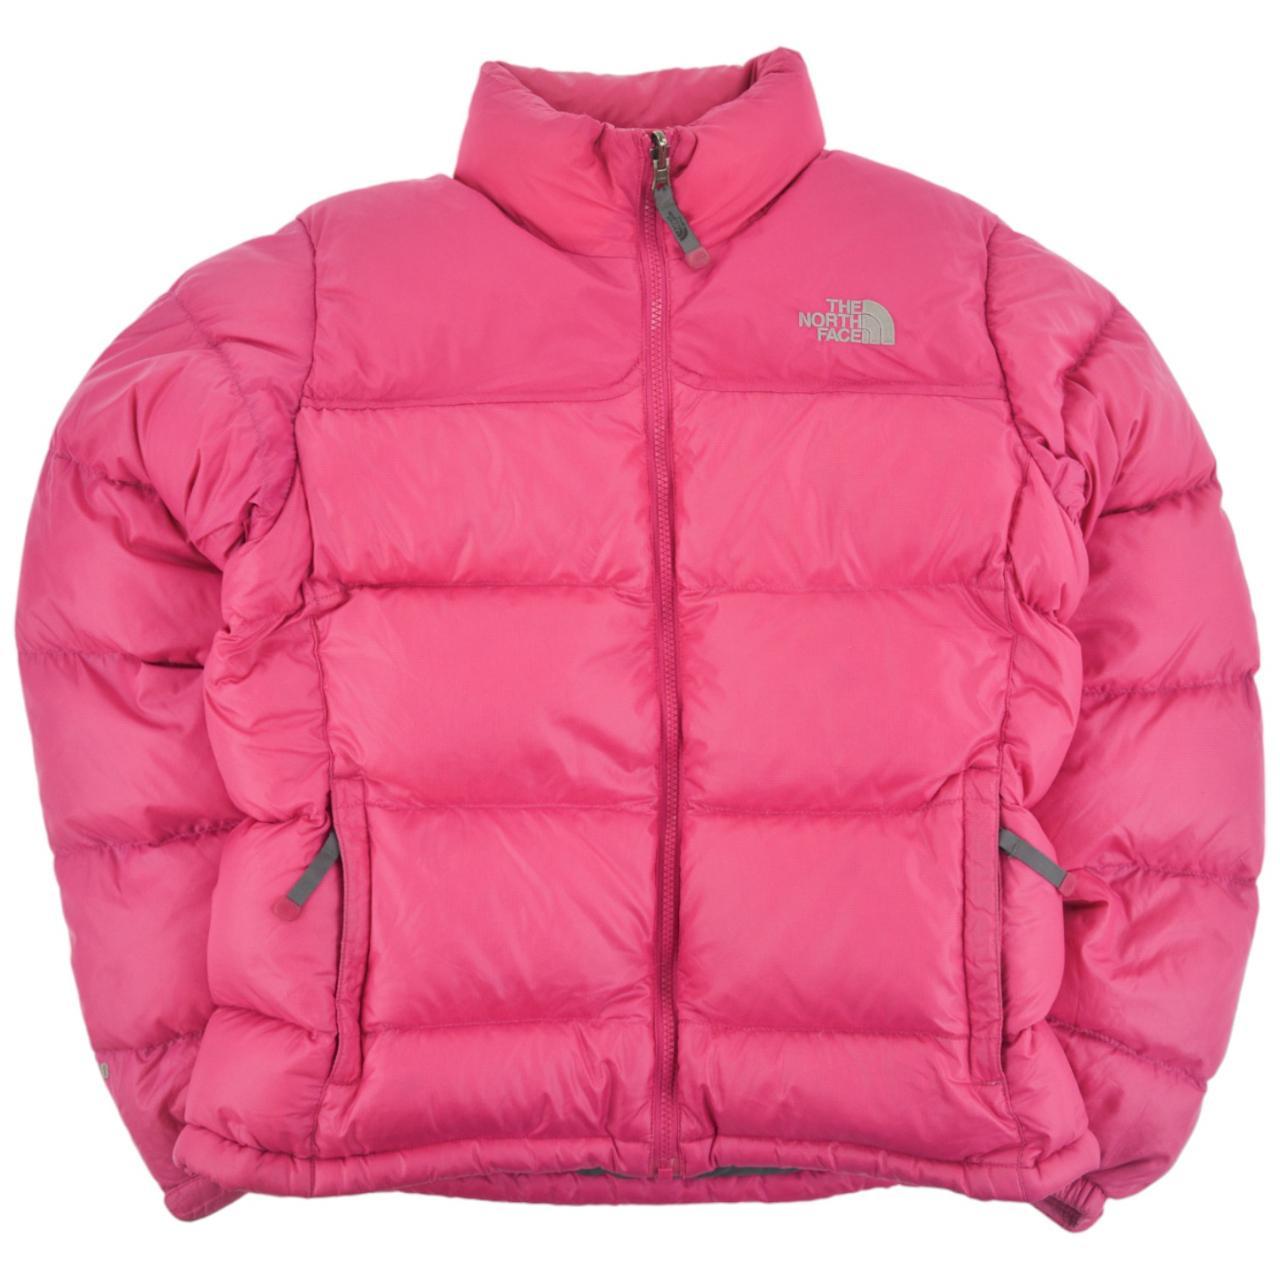 Vintage North Face Nuptse Puffer Jacket Woman’s Size M - second wave ...